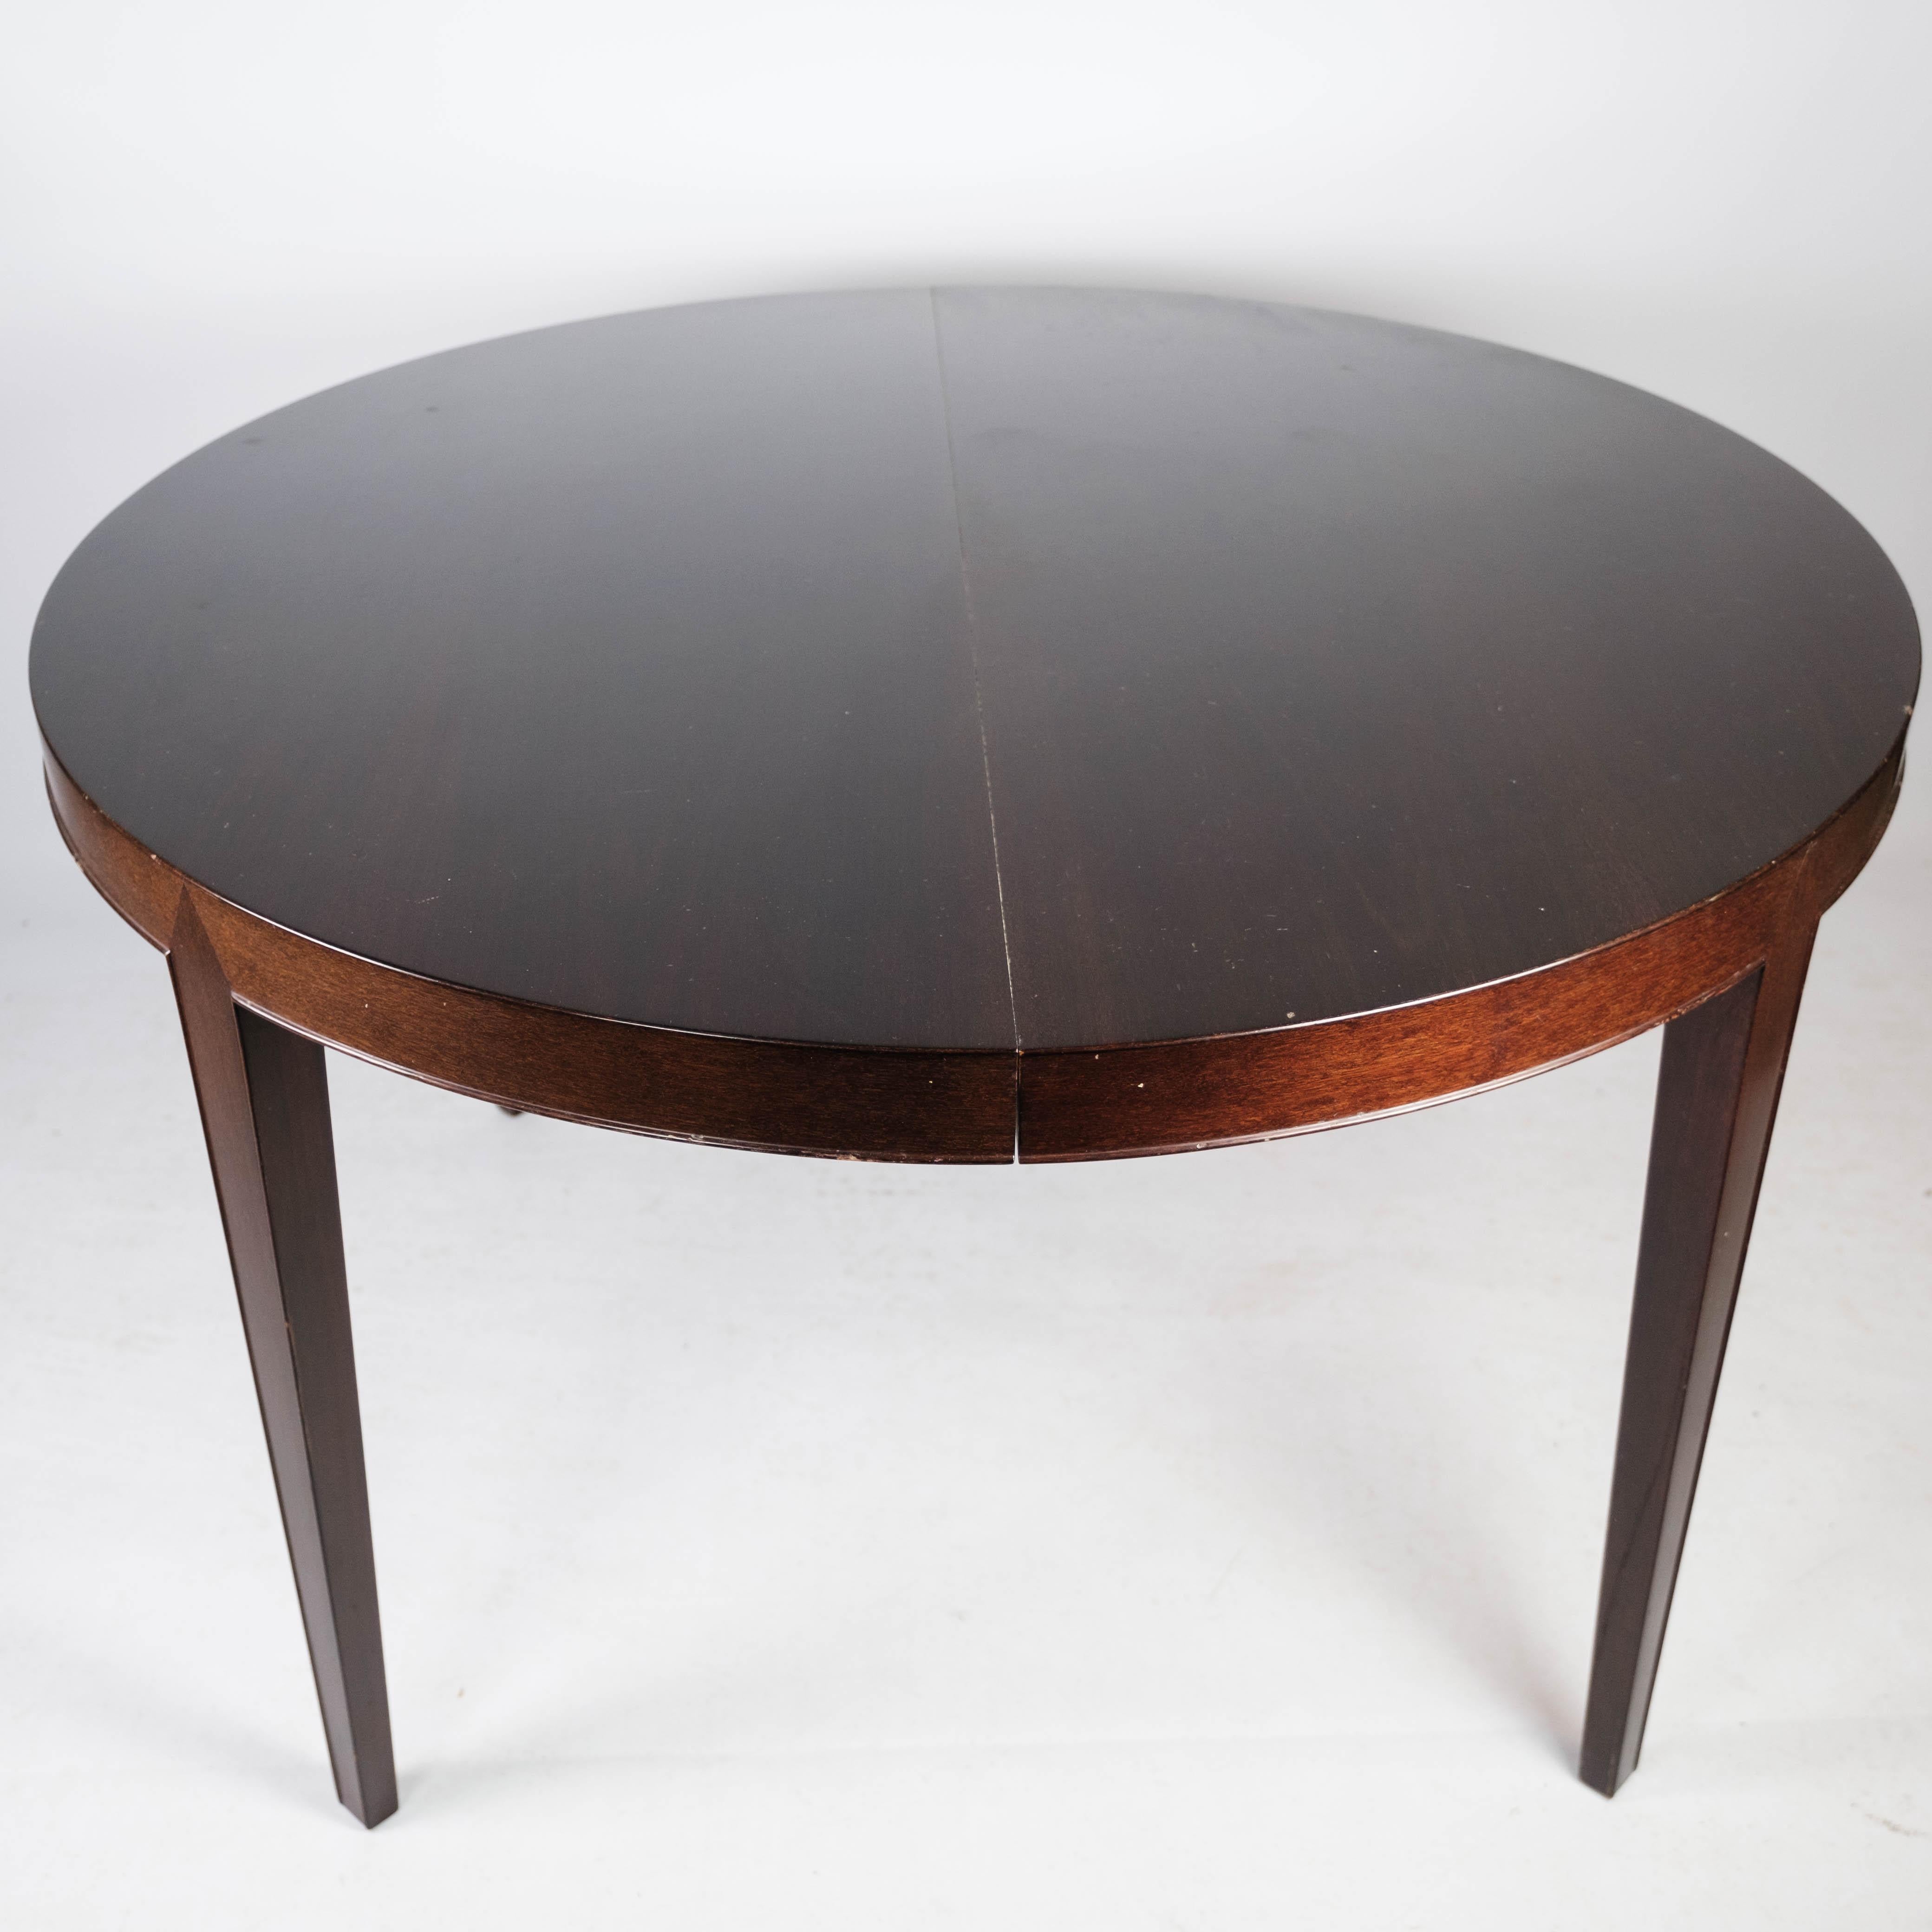 Dining table in mahogany with three extension plates, of Danish design manufactured by Haslev Furniture in the 1960s. The table is in great vintage condition. 
Extentions are 50 cm each.